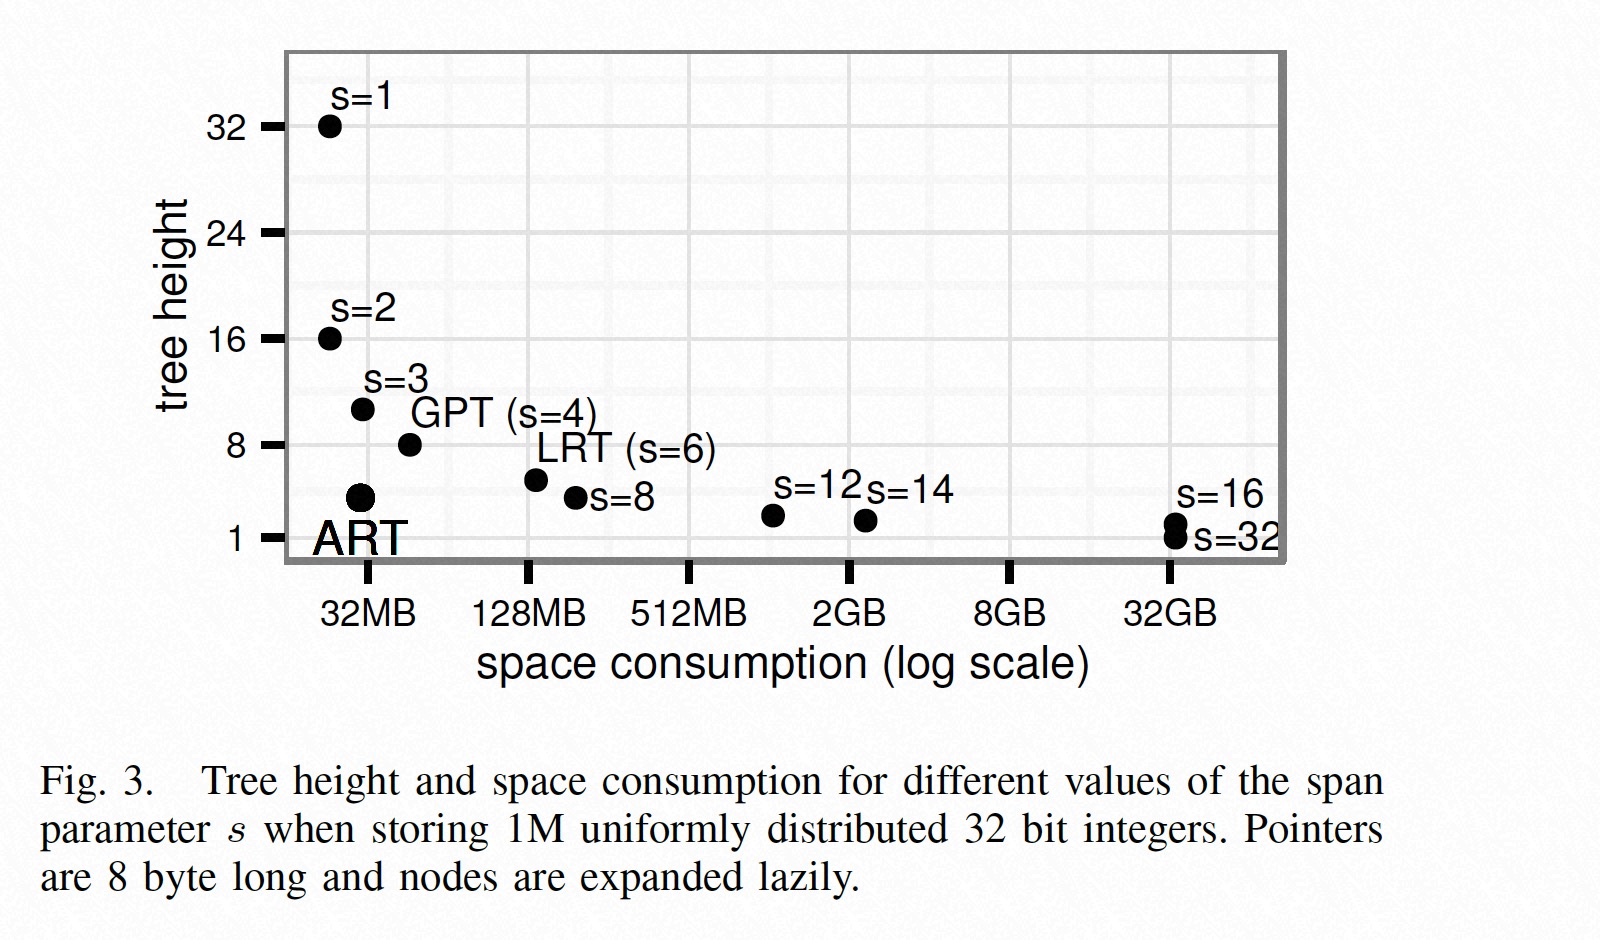 tree height and space consumption